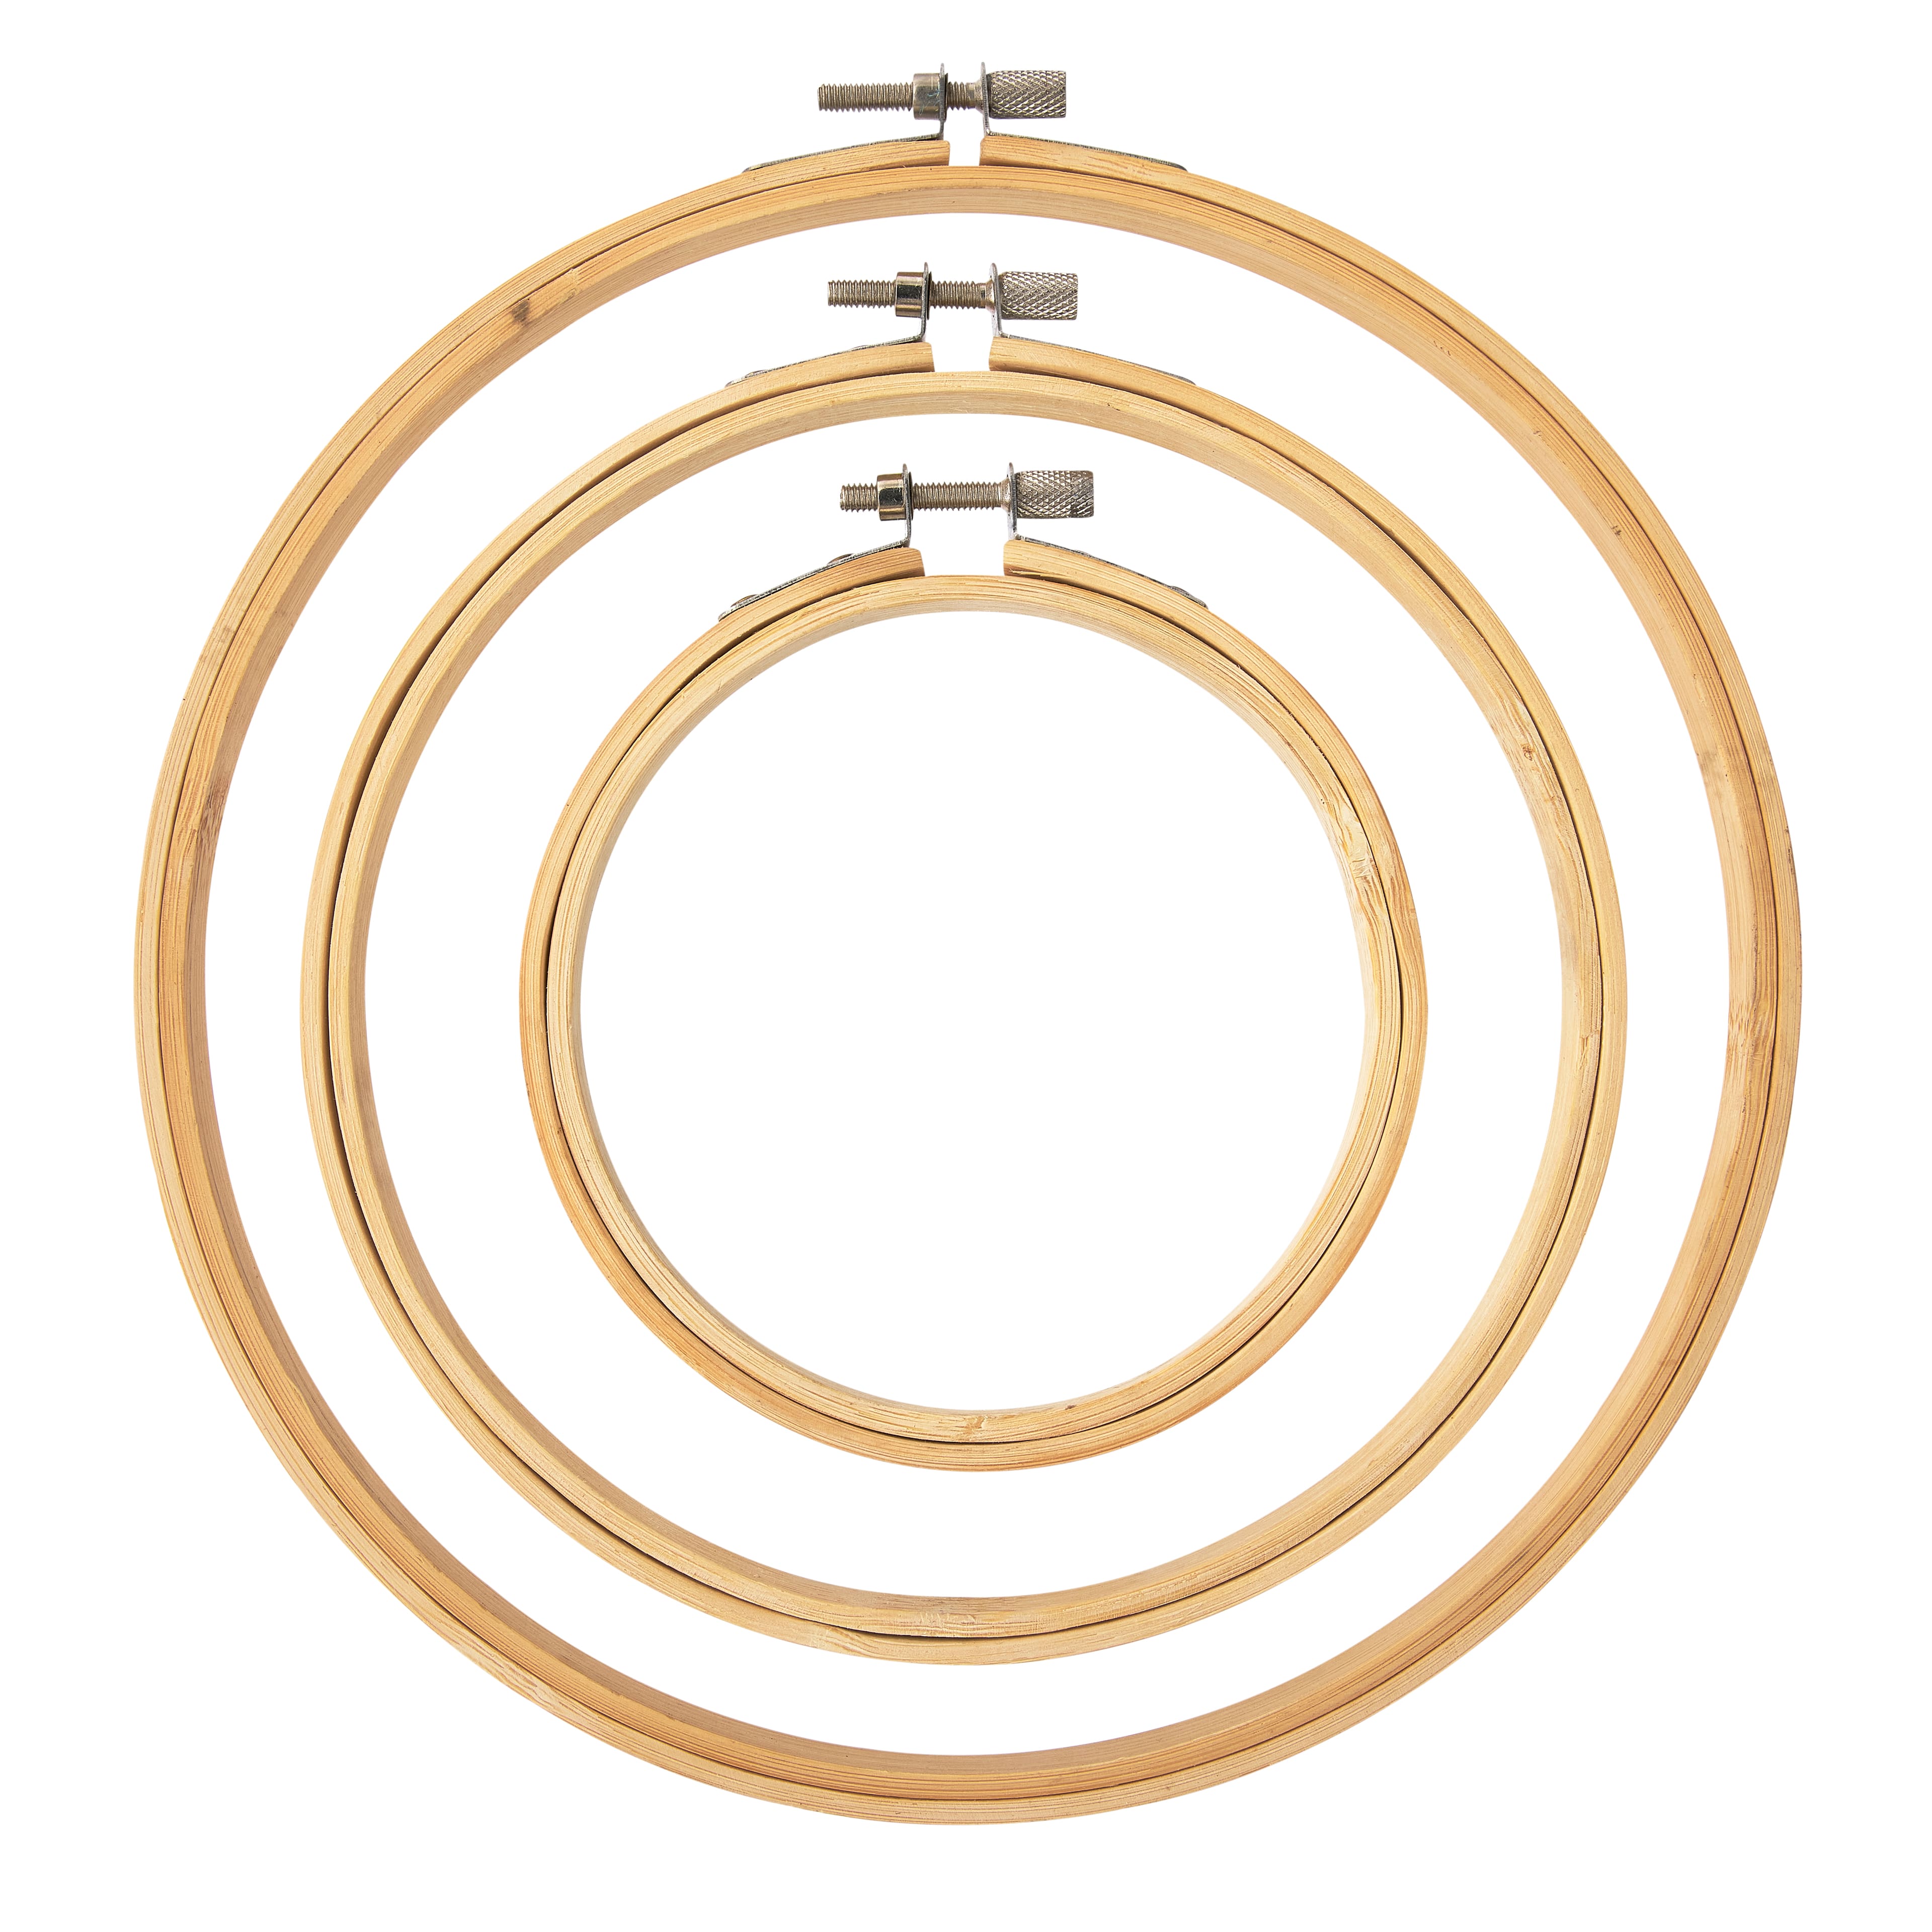 Essentials by Leisure Arts Wood Embroidery Hoop 14 in. Bamboo